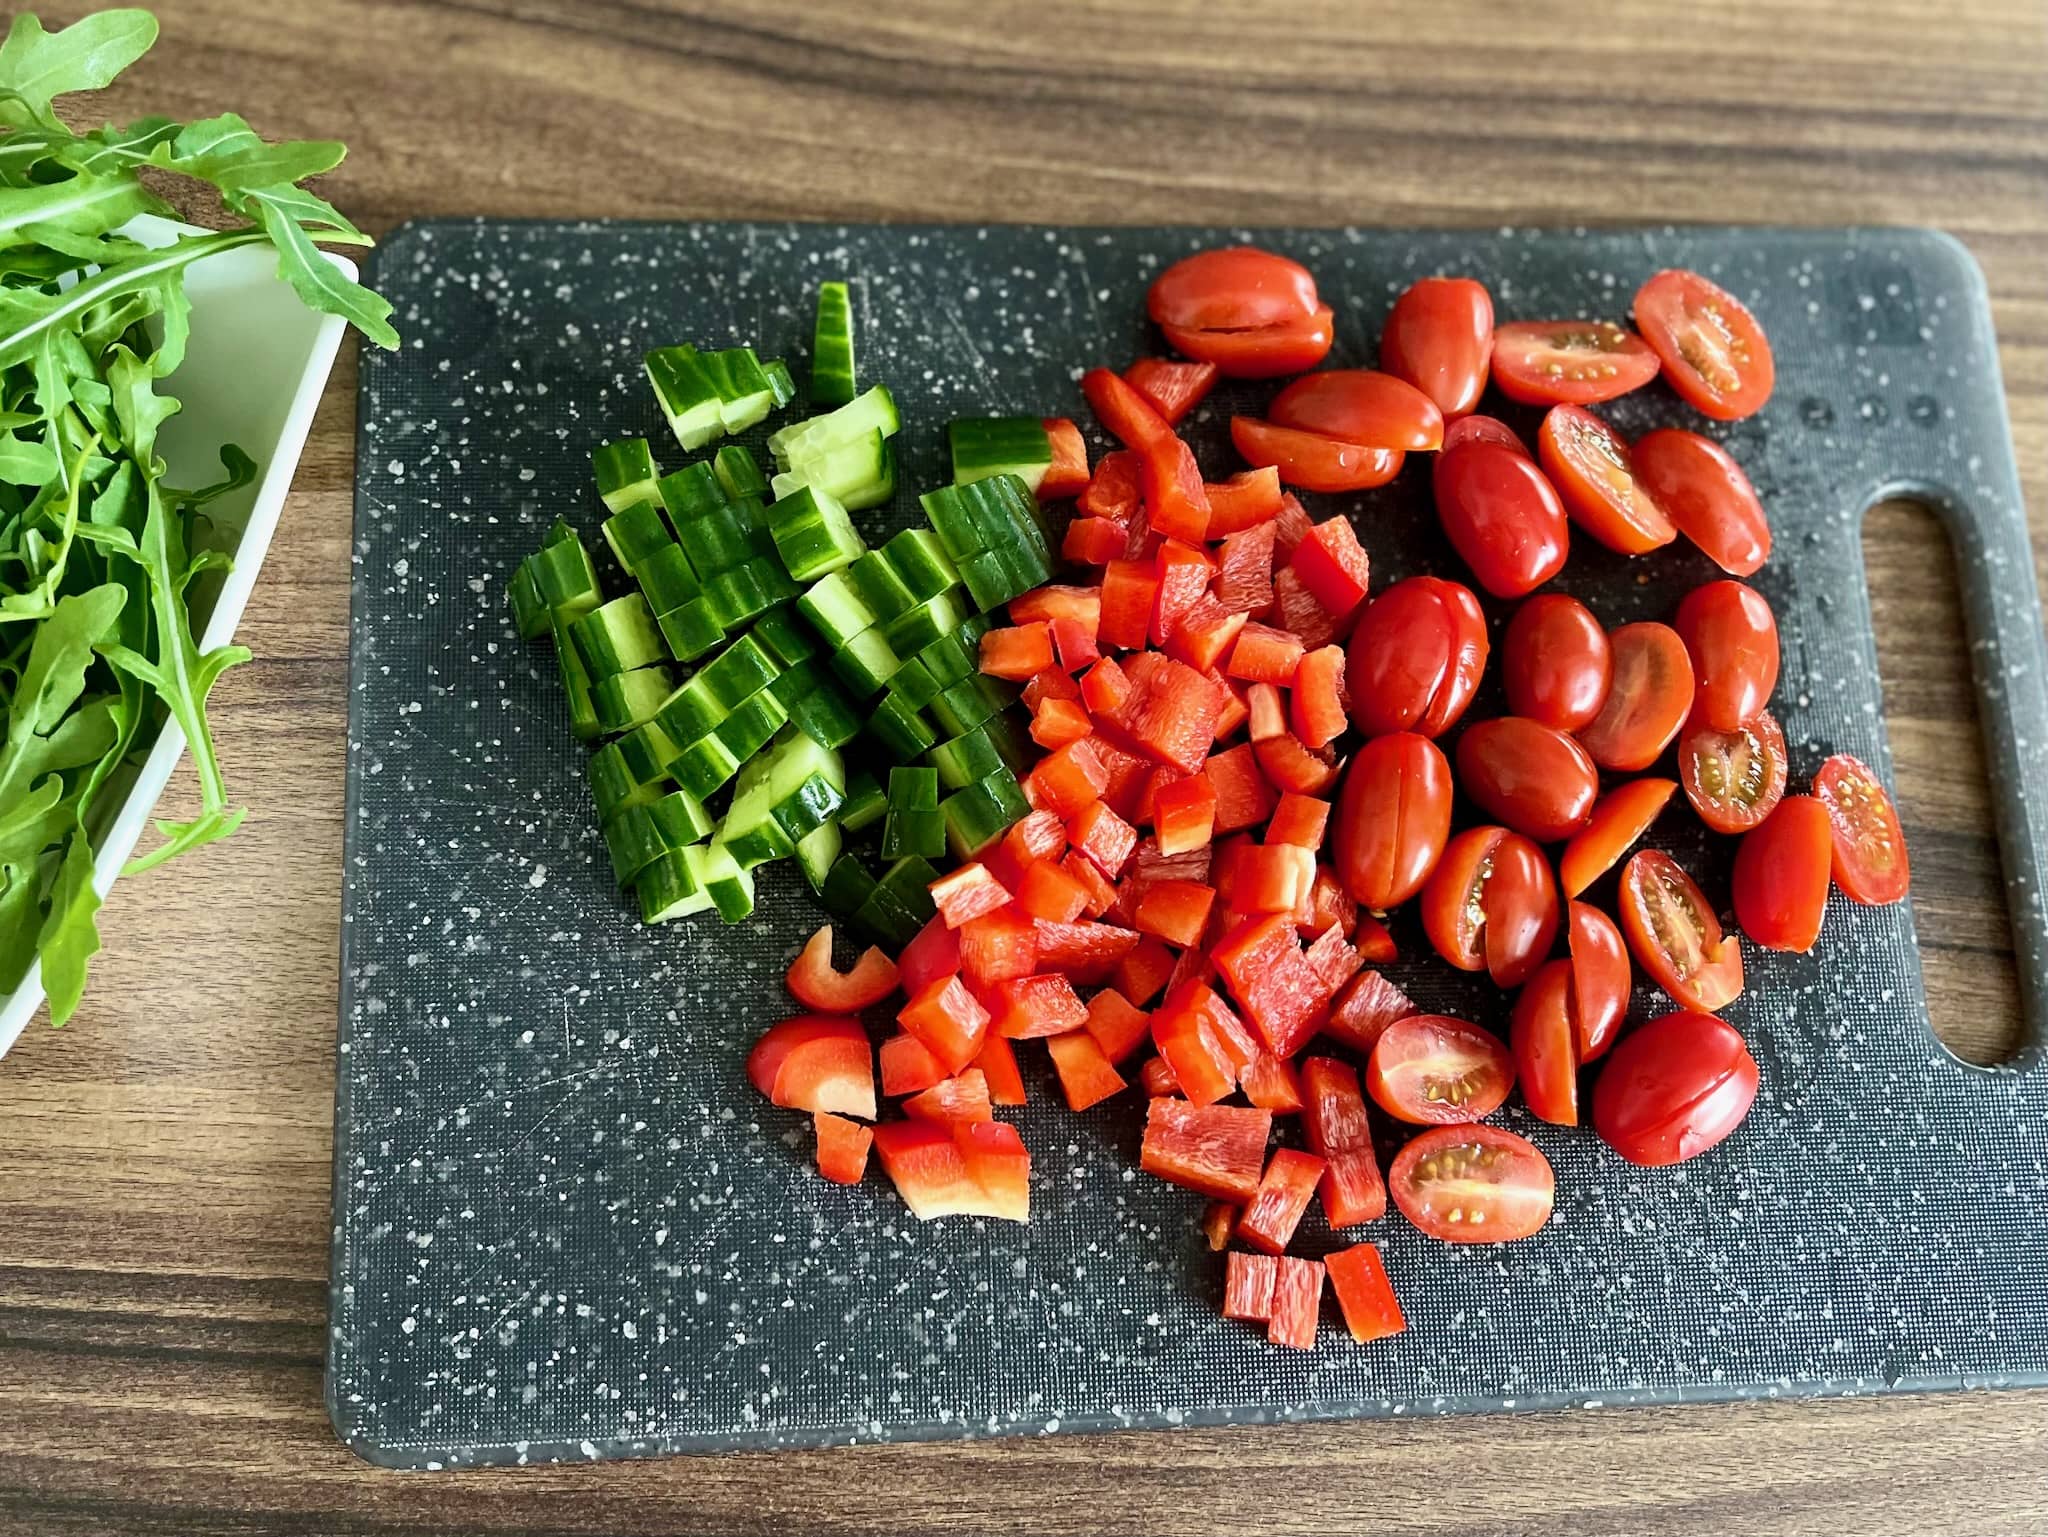 Tomatoes, peppers and cucumber chopped on the board